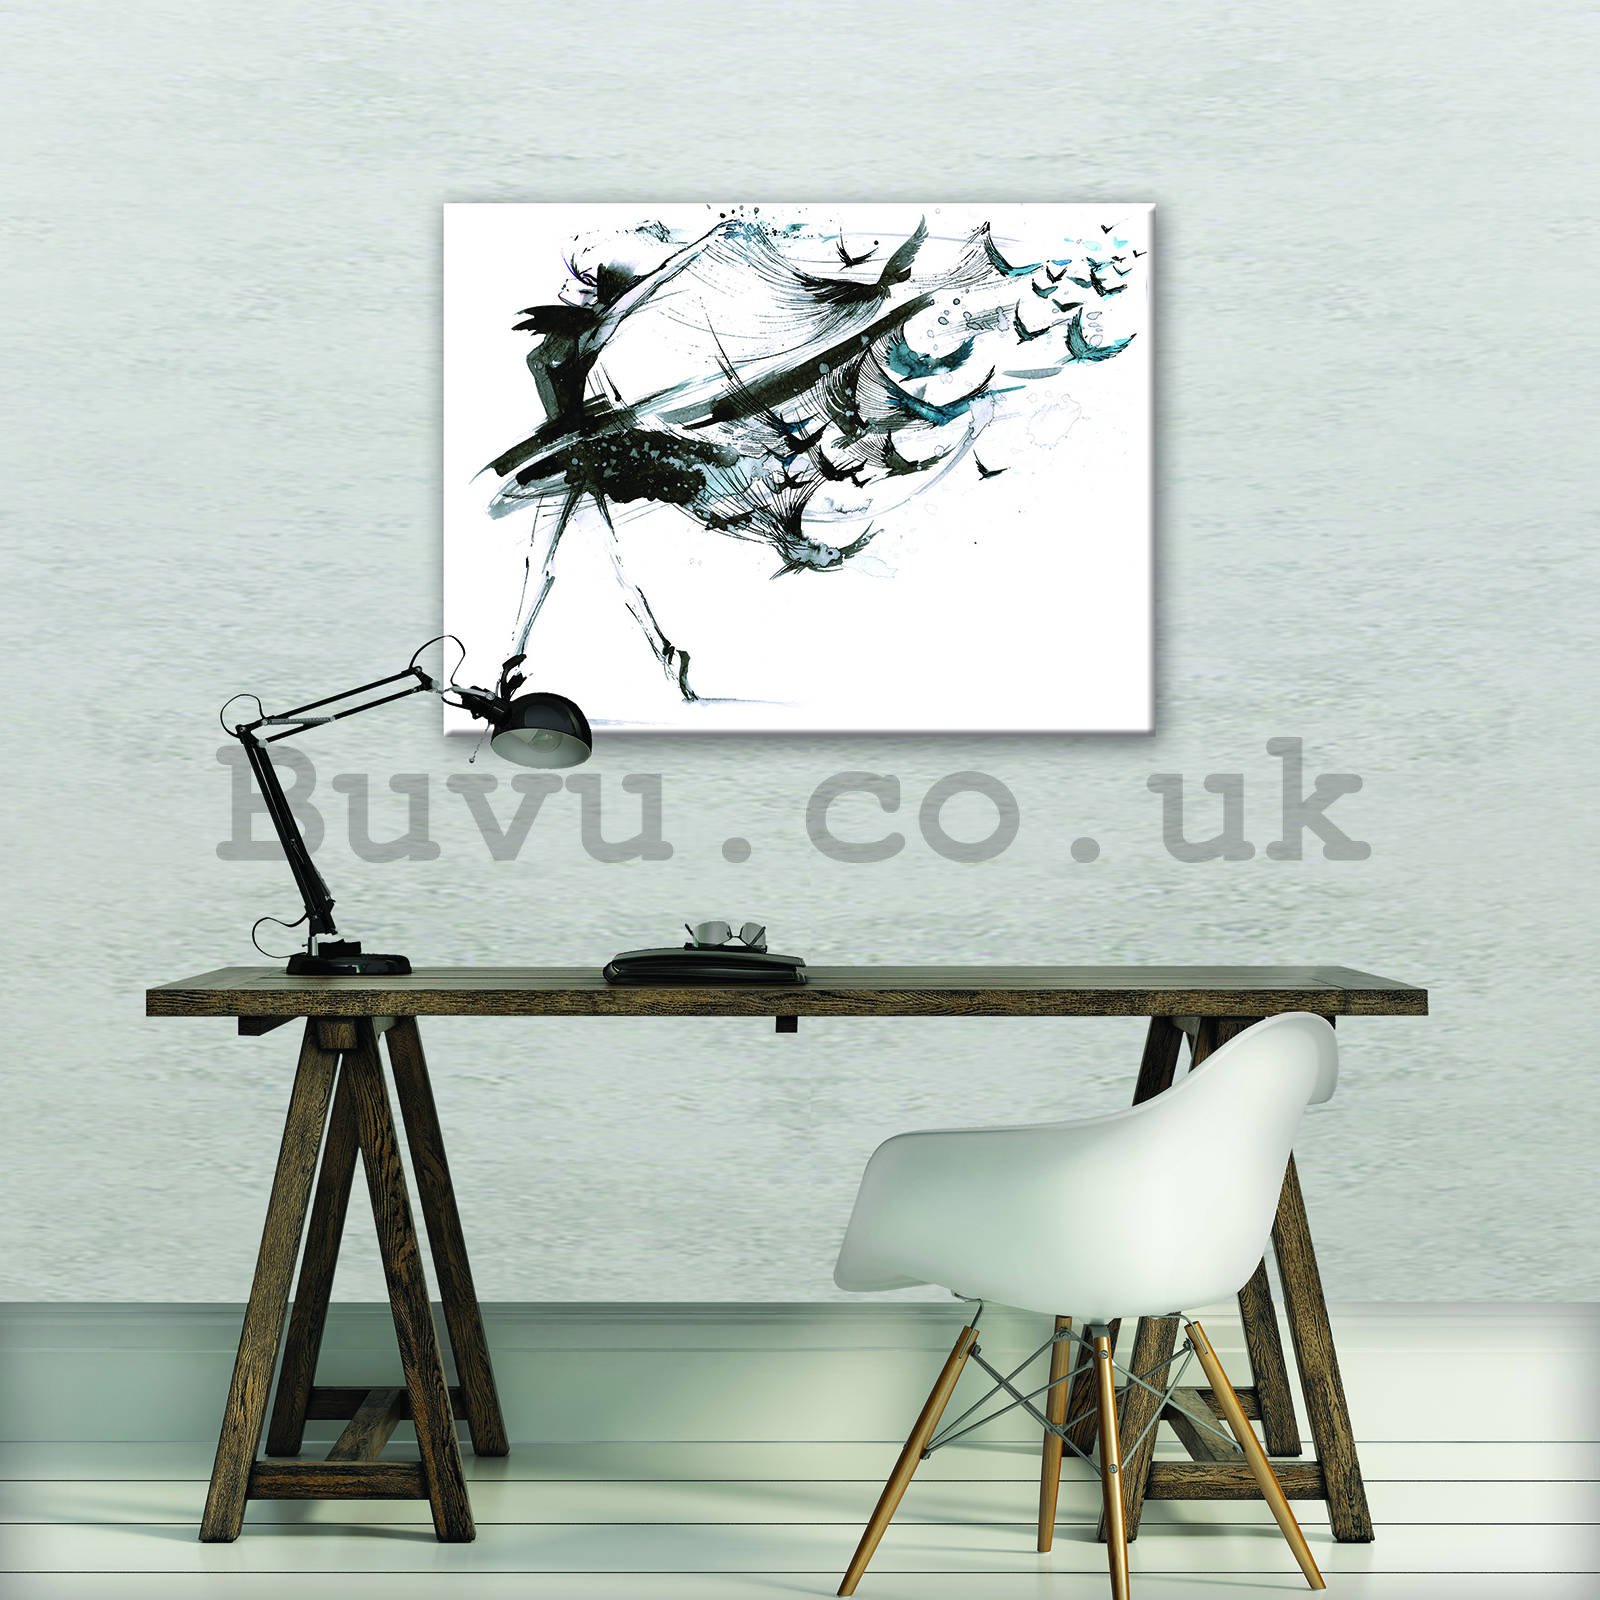 Painting on canvas: Dancing with birds - 80x60 cm